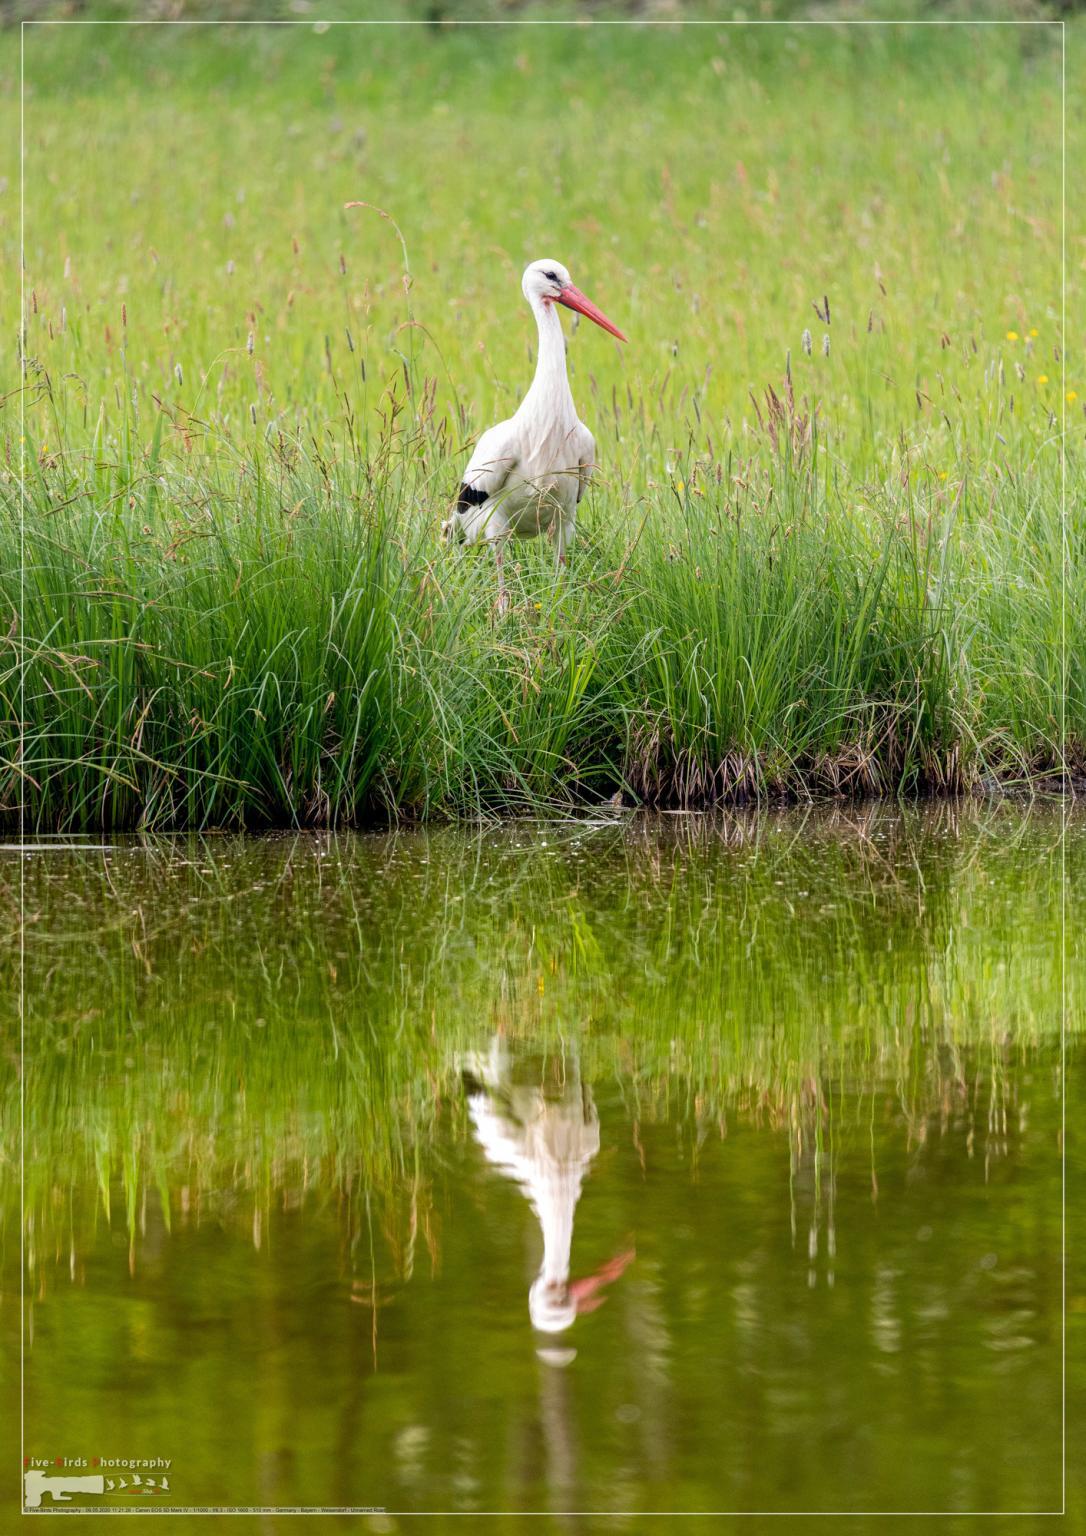 White stork in a bird sanctuary in southern Germany